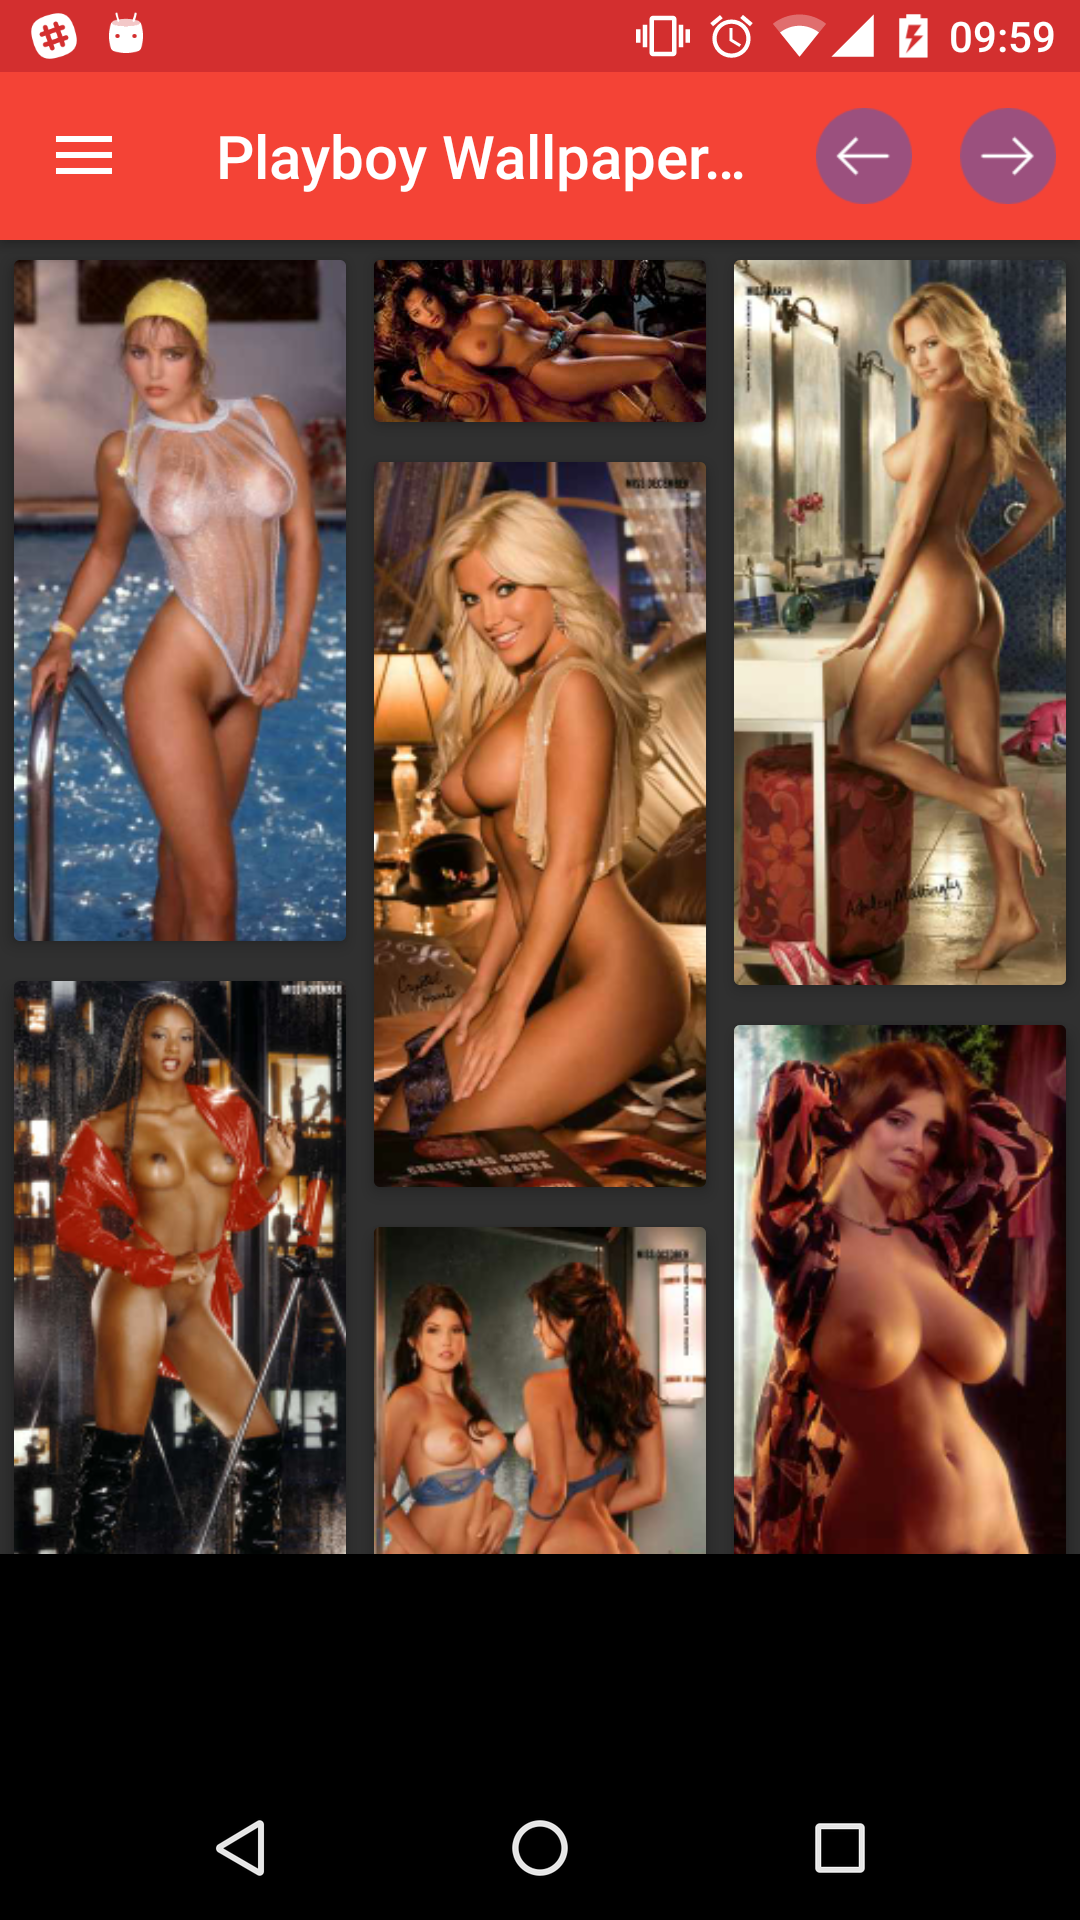 Playboy wallpapers application,app,gallery,cosplay,personalization,apps,browser,customization,hot,adult,pics,erotic,hentai,sexy,magazine,centerfolds,hantai,backgrounds,ebony,wallpapers,pornstar,mature,images,photo,playboy,porn,free,download